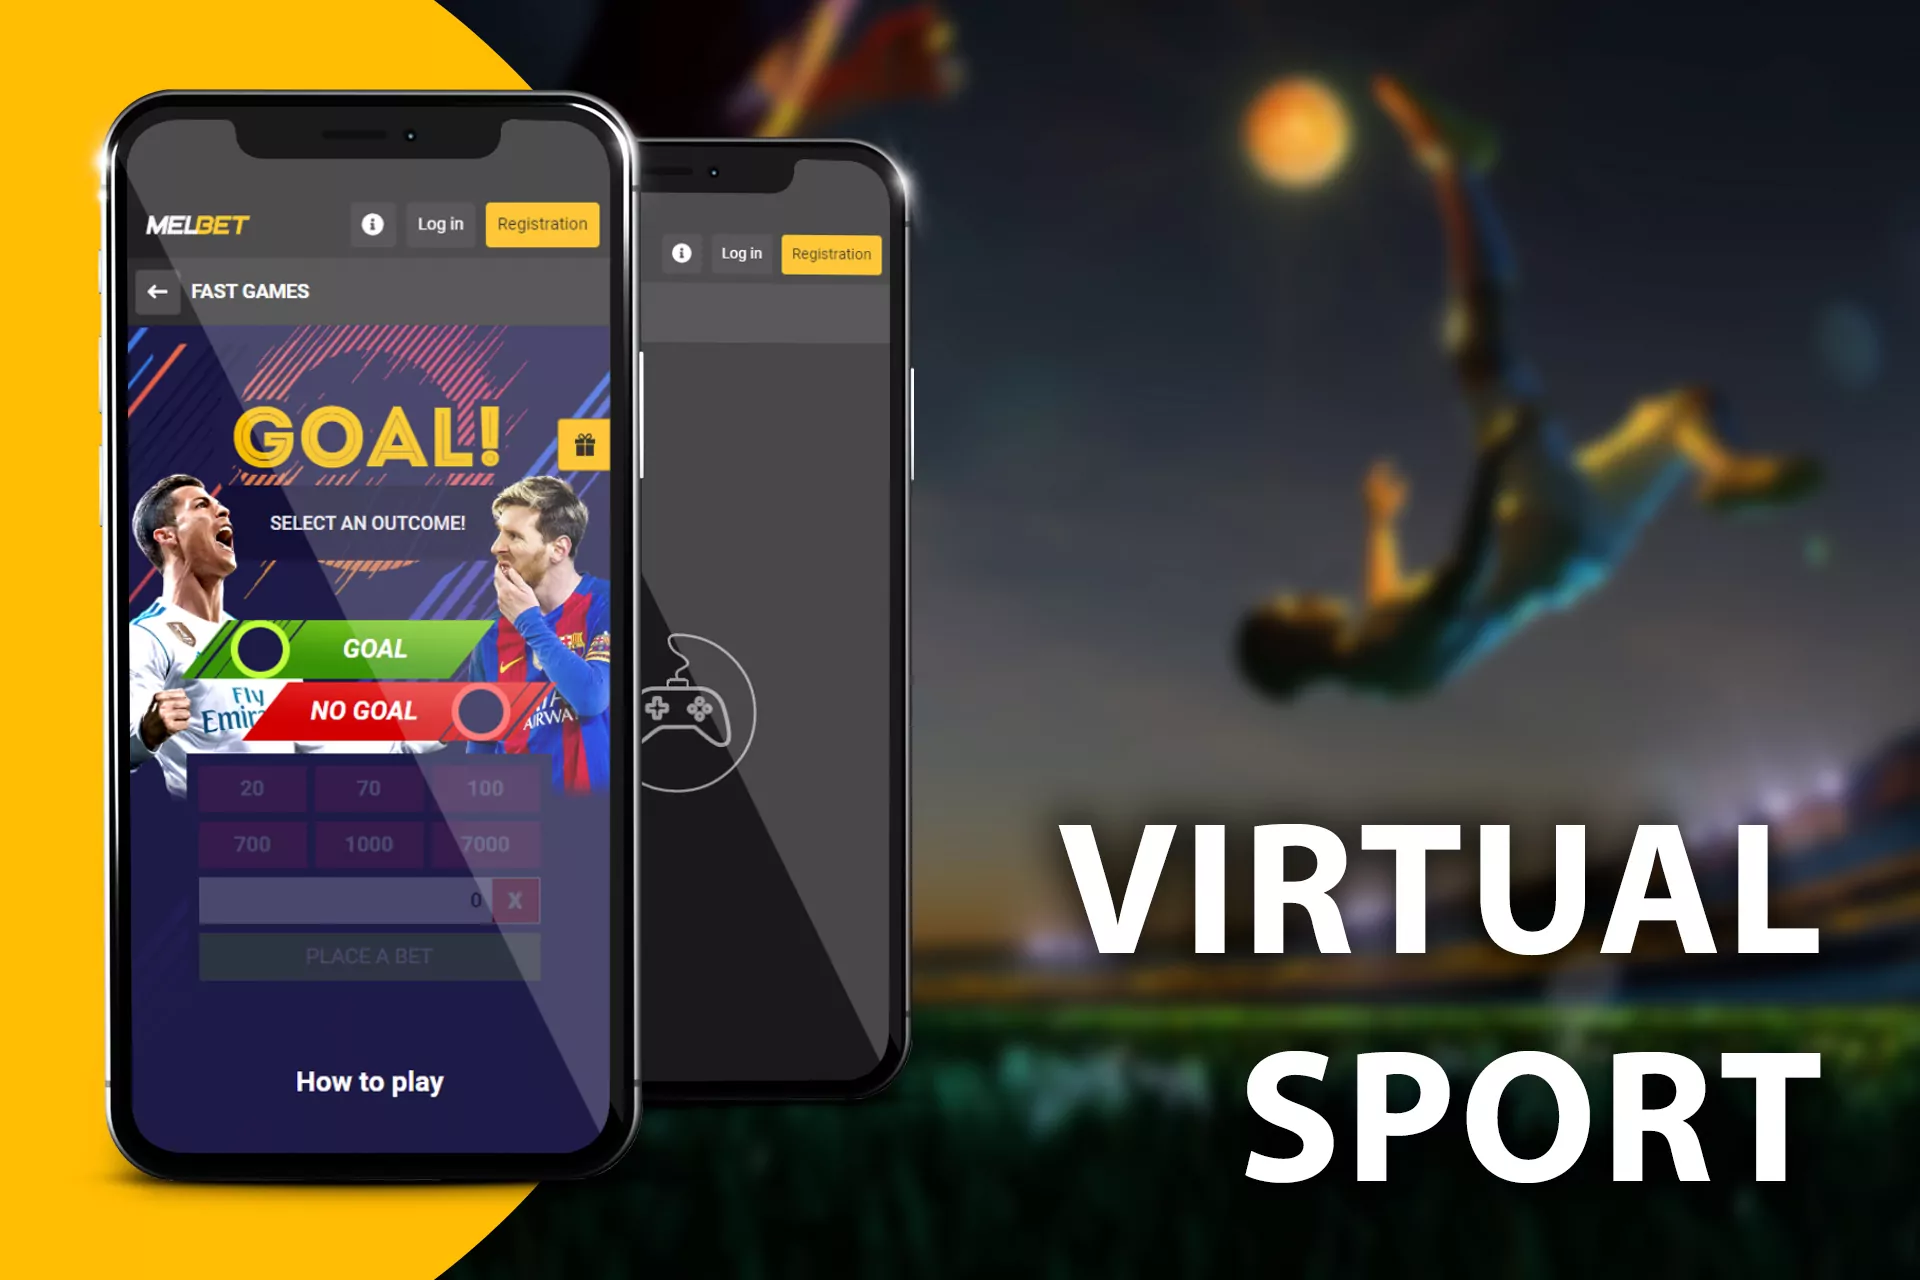 Place bets on virtual sports matches in the Melbet mobile app.